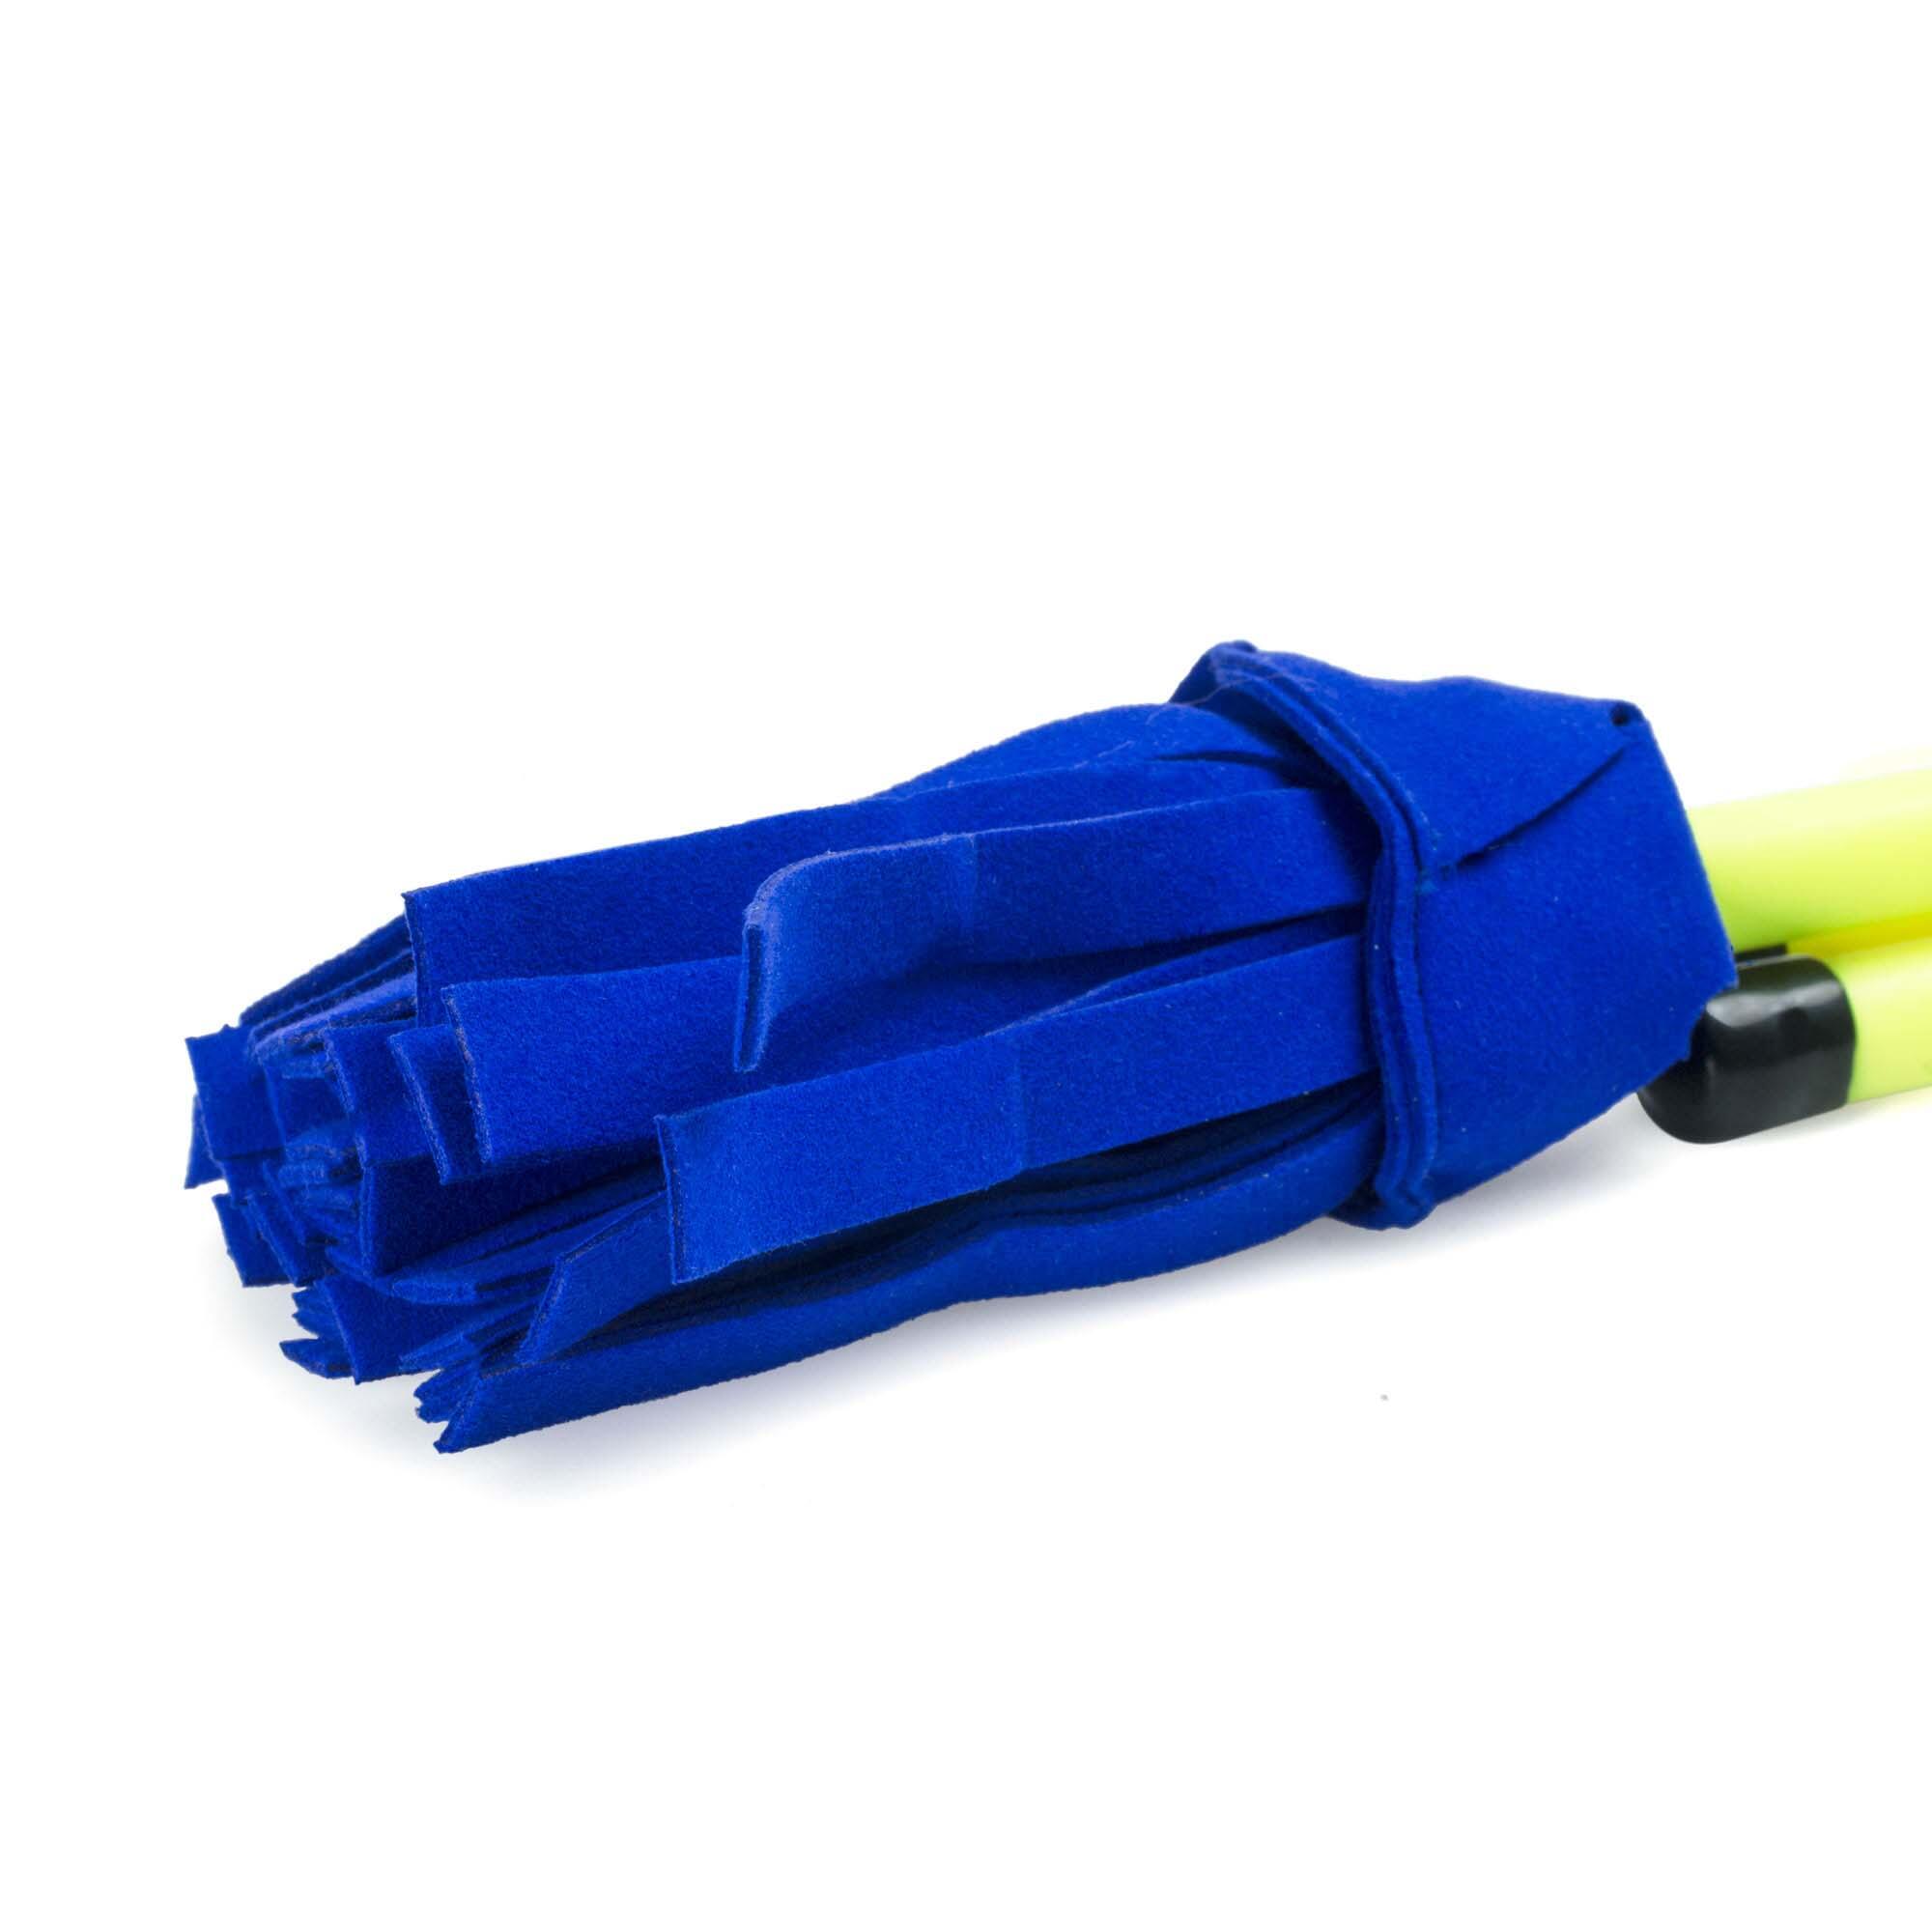 Neo Fluoro Flower Stick and Hand Sticks-Yellow with Blue Tassels 3/3